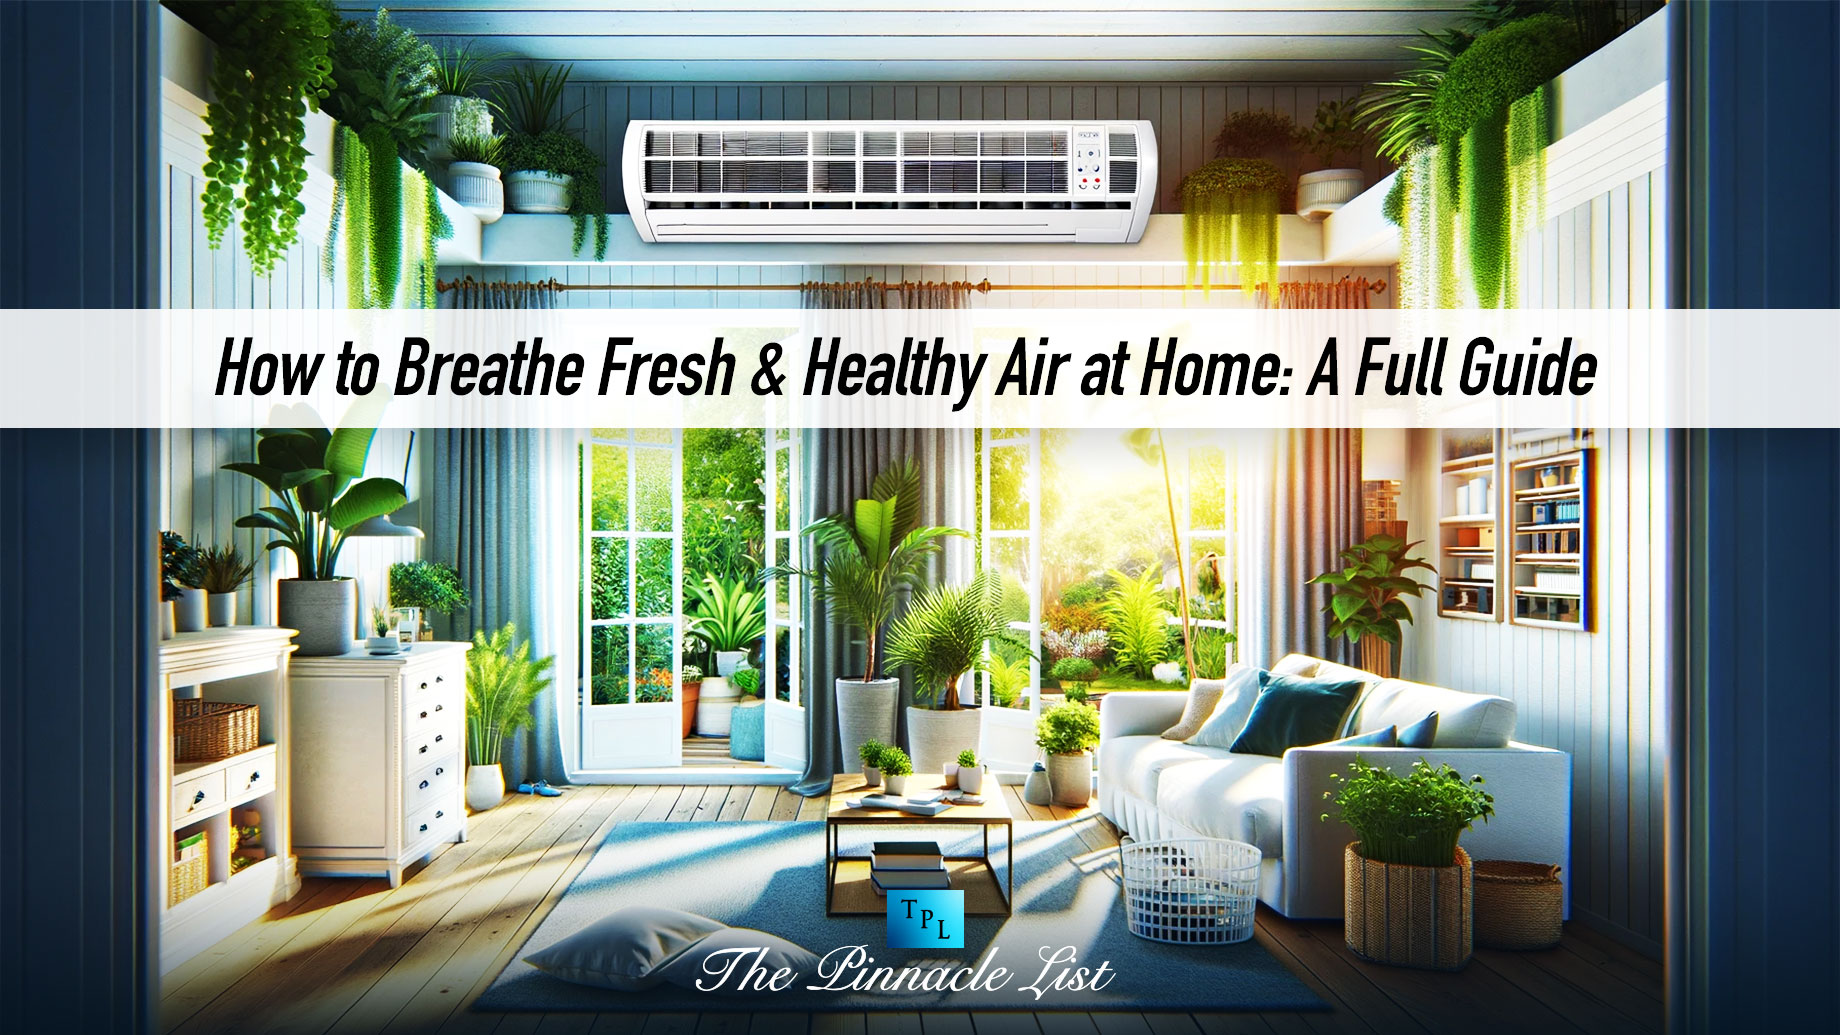 How to Breathe Fresh & Healthy Air at Home: A Full Guide